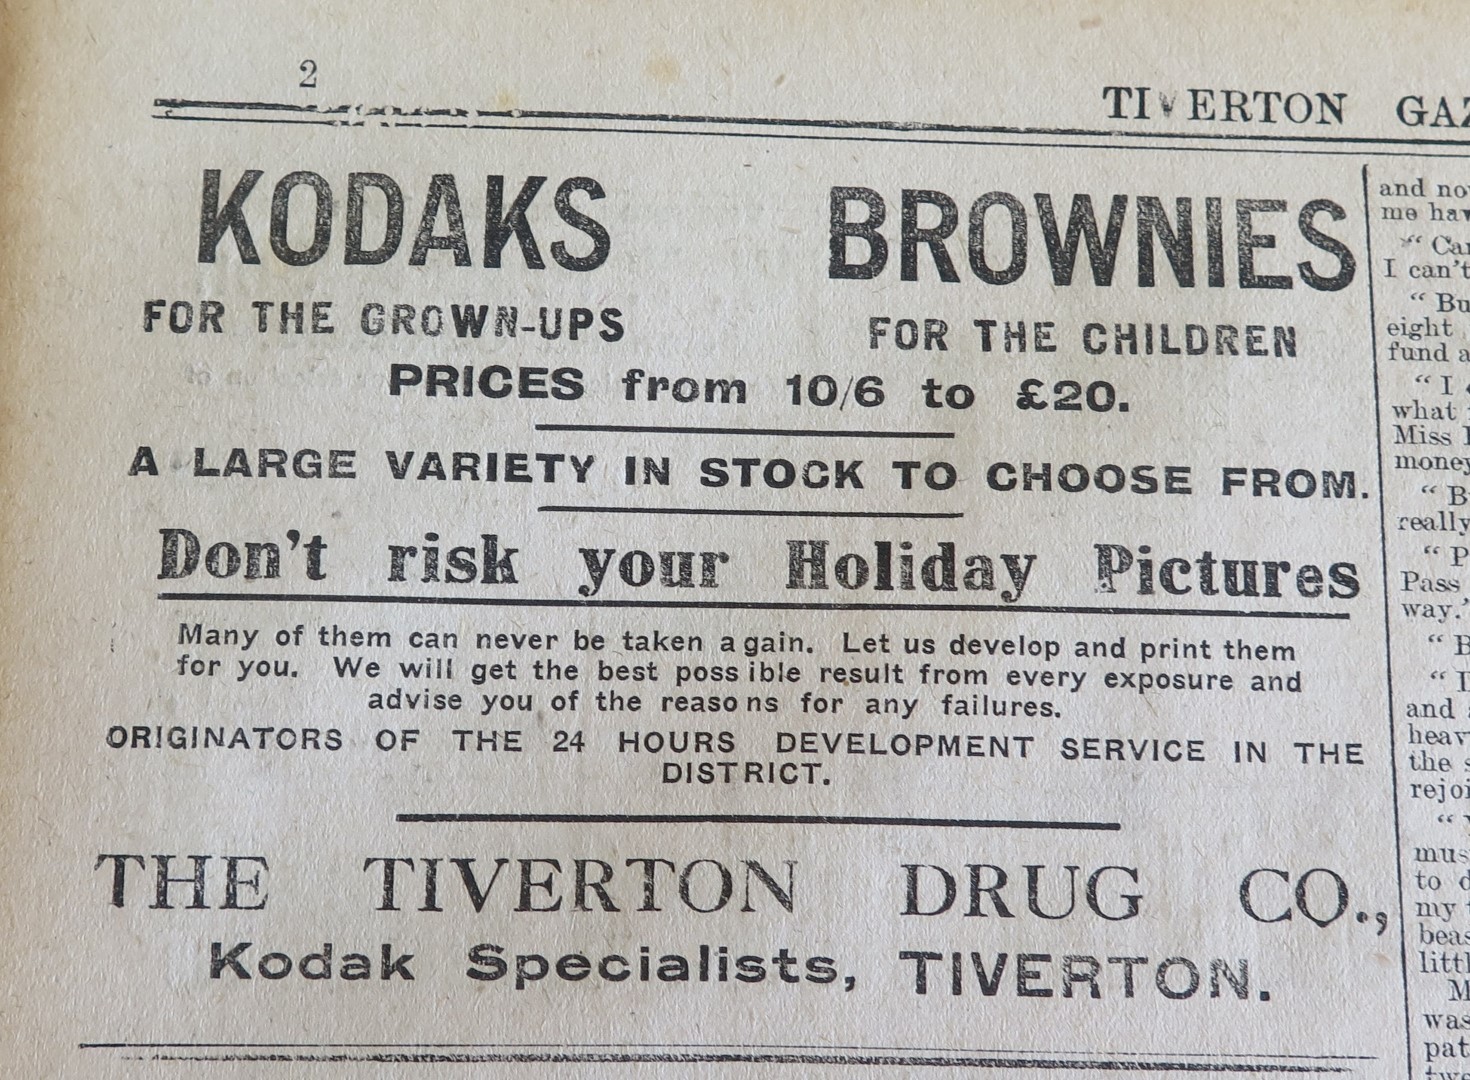 A newspaper advert, black text on plain cream background, for 'Kodaks Brownie' from The Tiverton Drug Co.